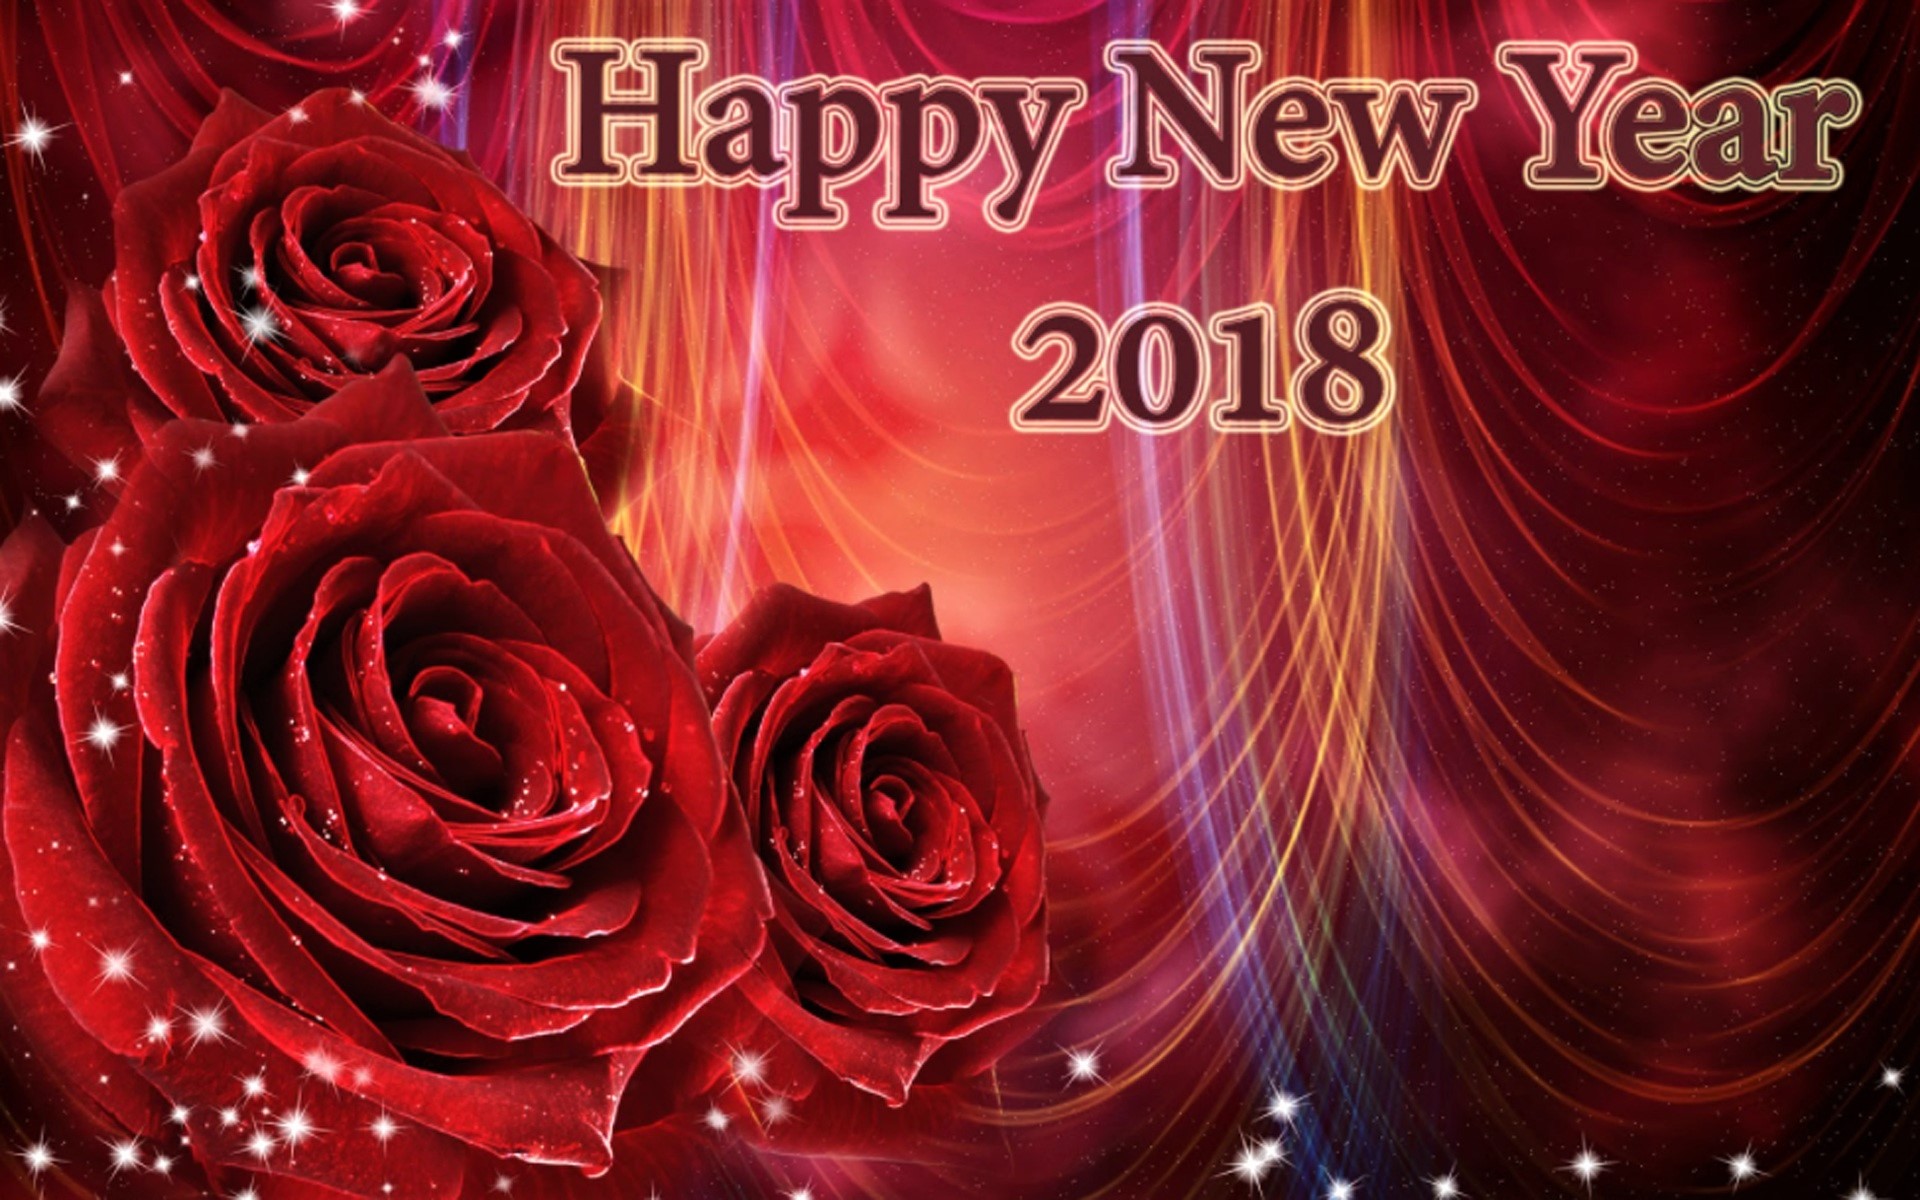 holiday, new year 2018, flower, happy new year, new year, red rose